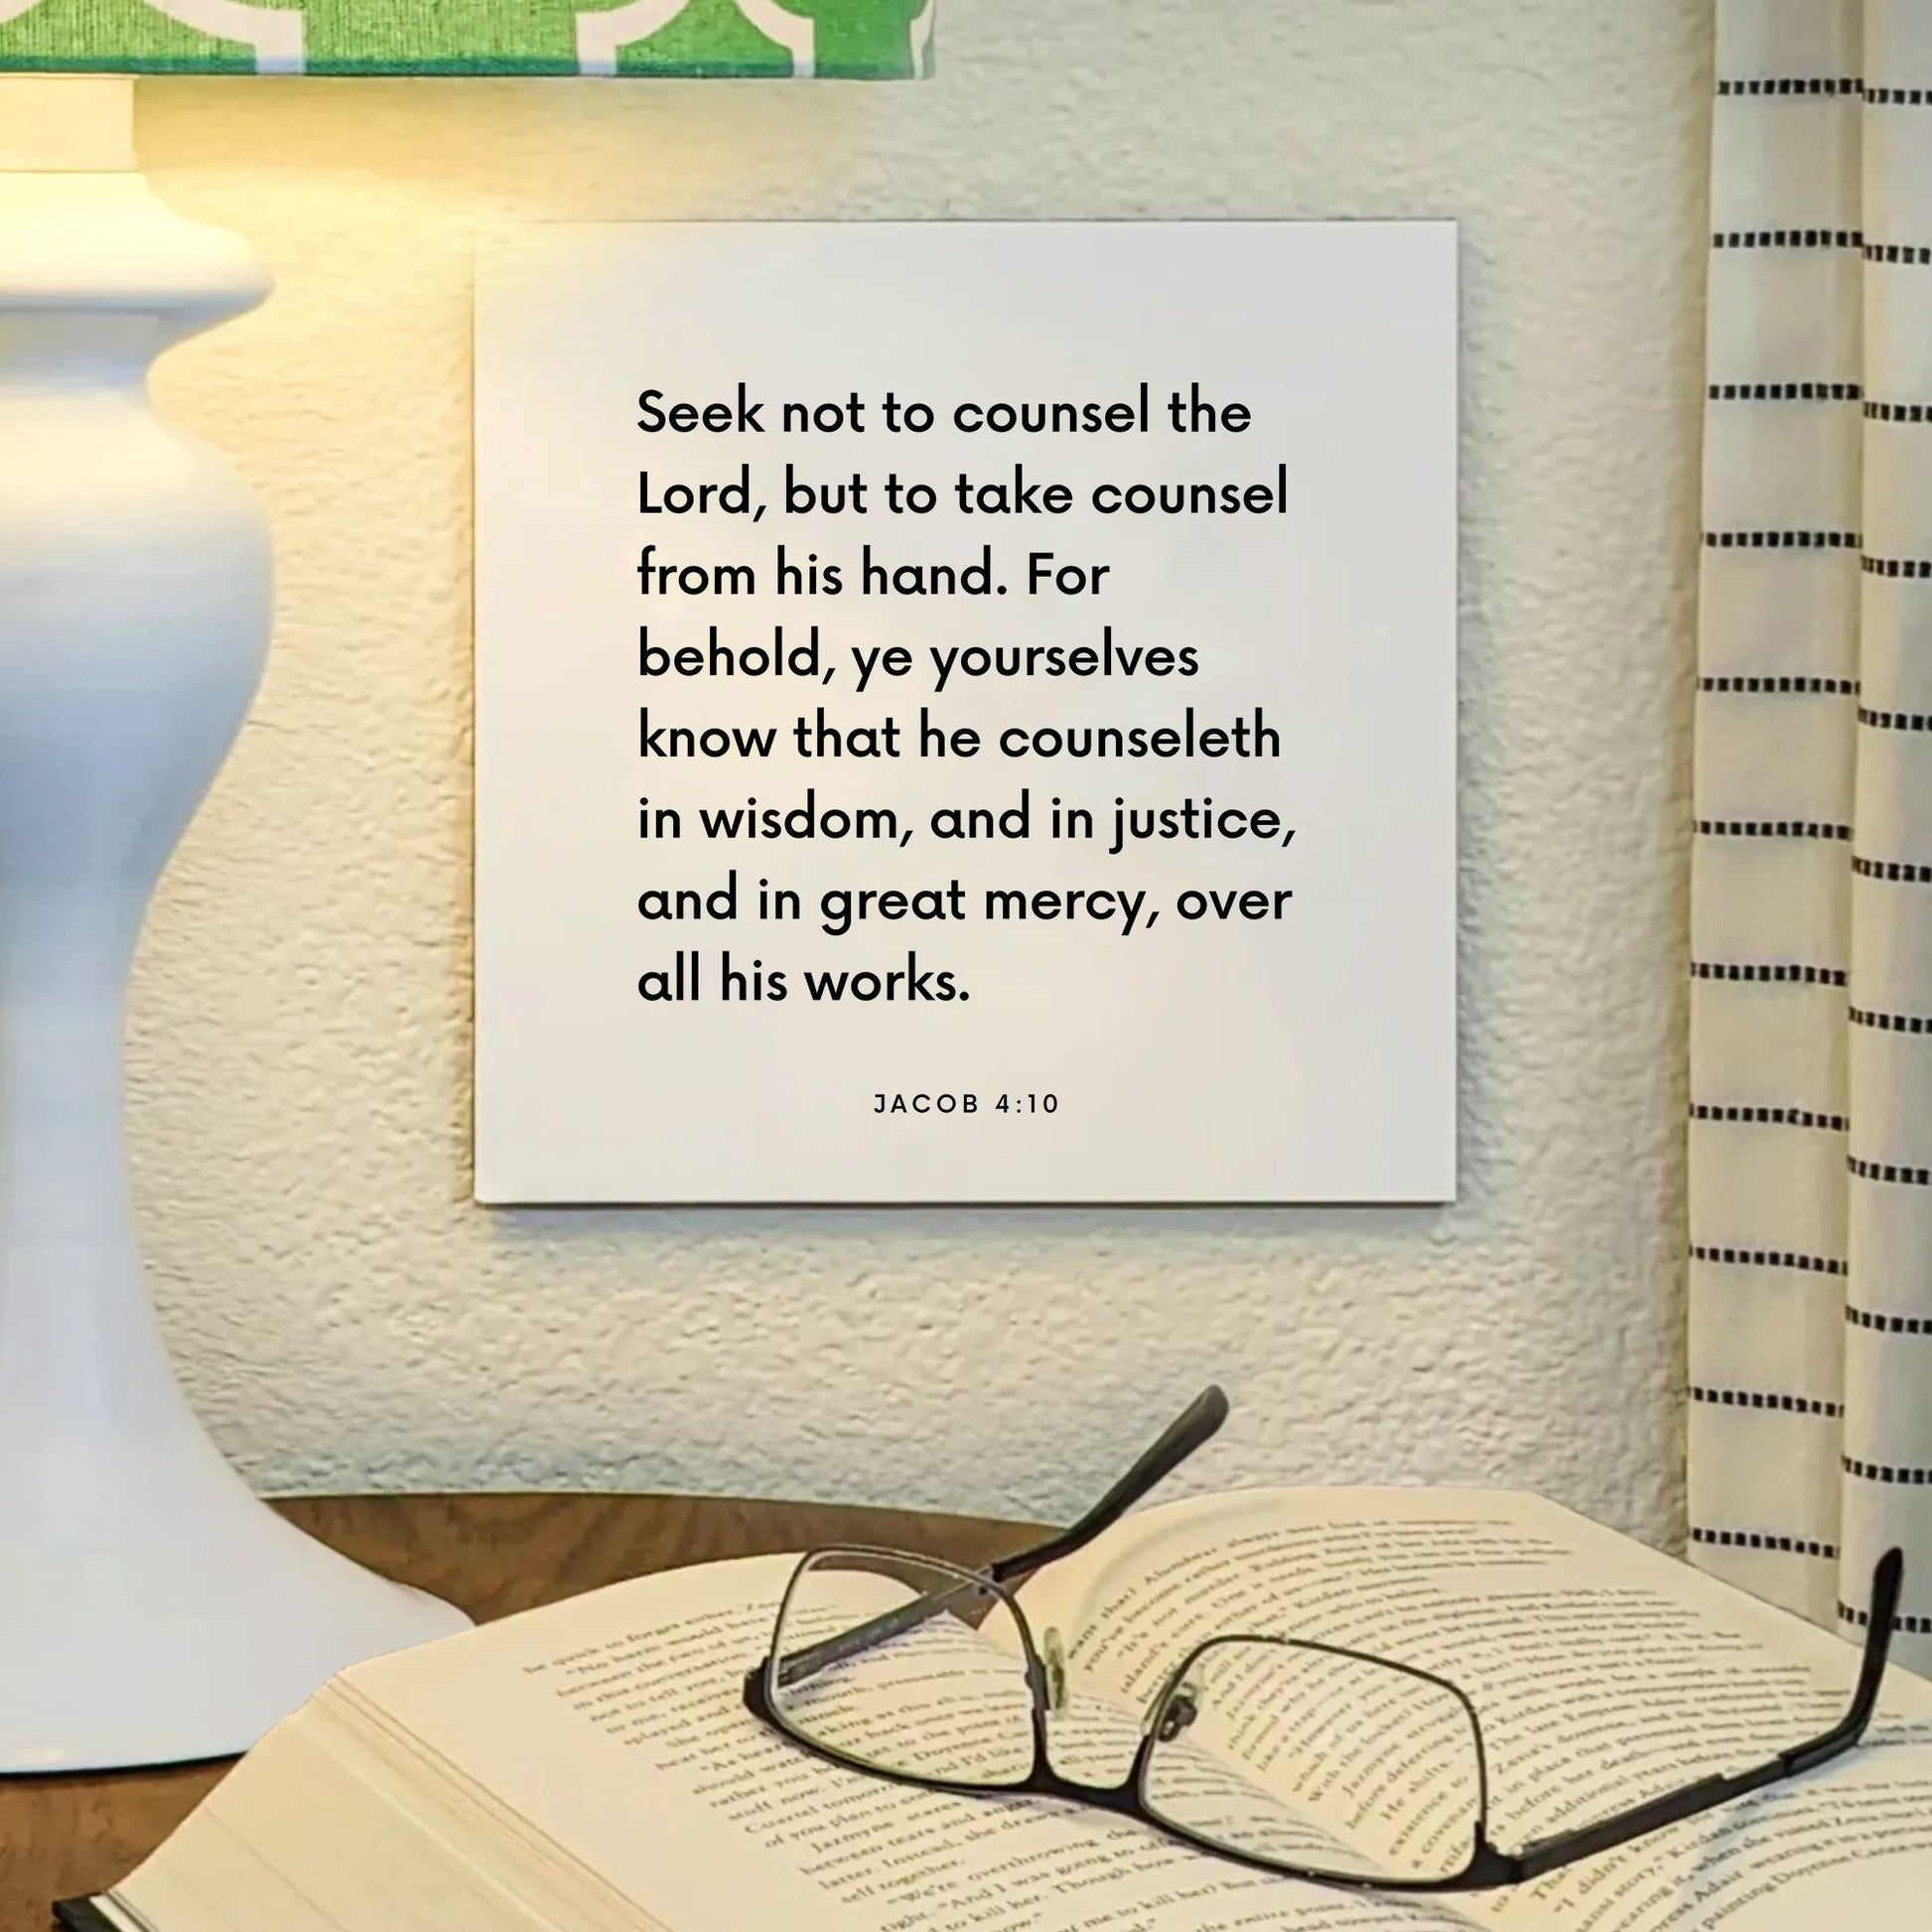 Lamp mouting of the scripture tile for Jacob 4:10 - "Seek not to counsel the Lord"